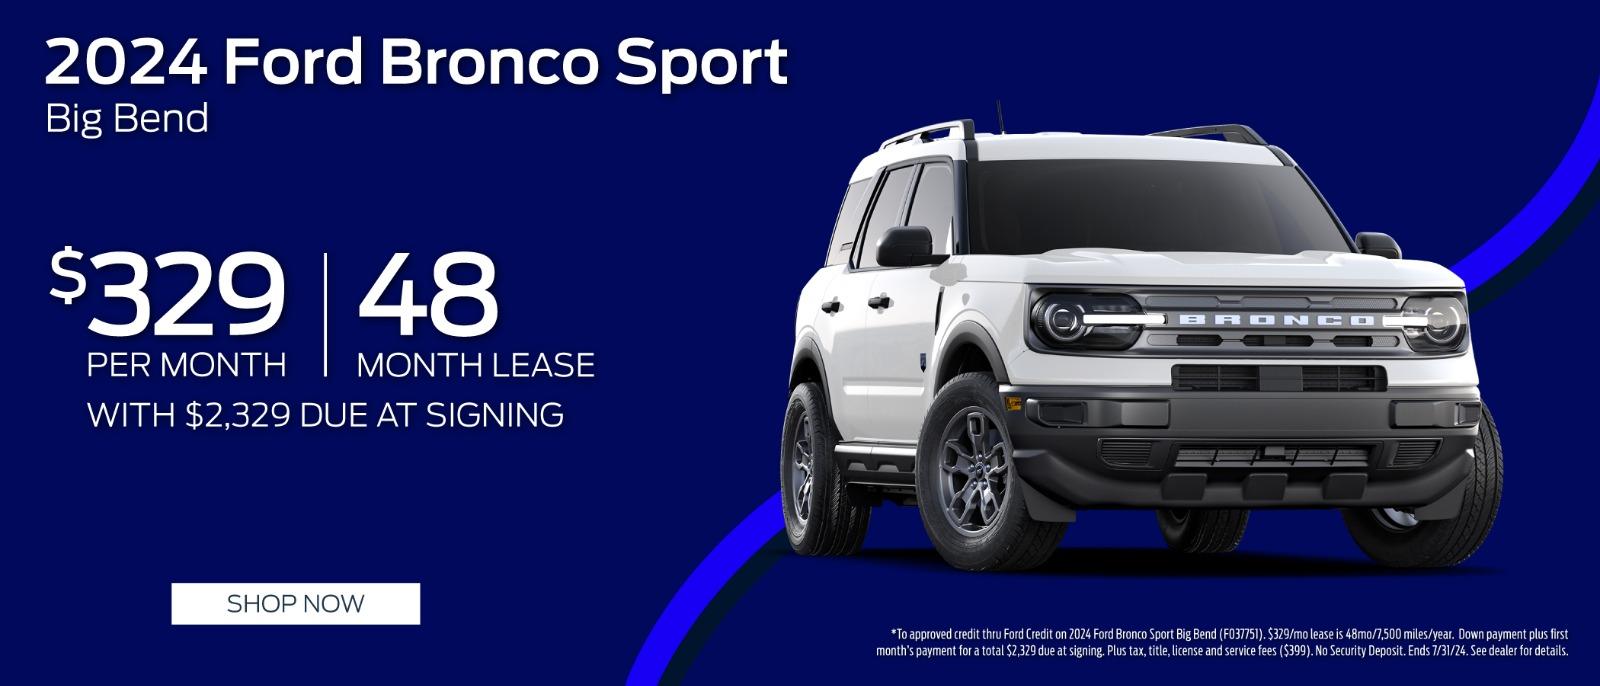 2023 Ford Bronco Lease for $329 per month for 48 months